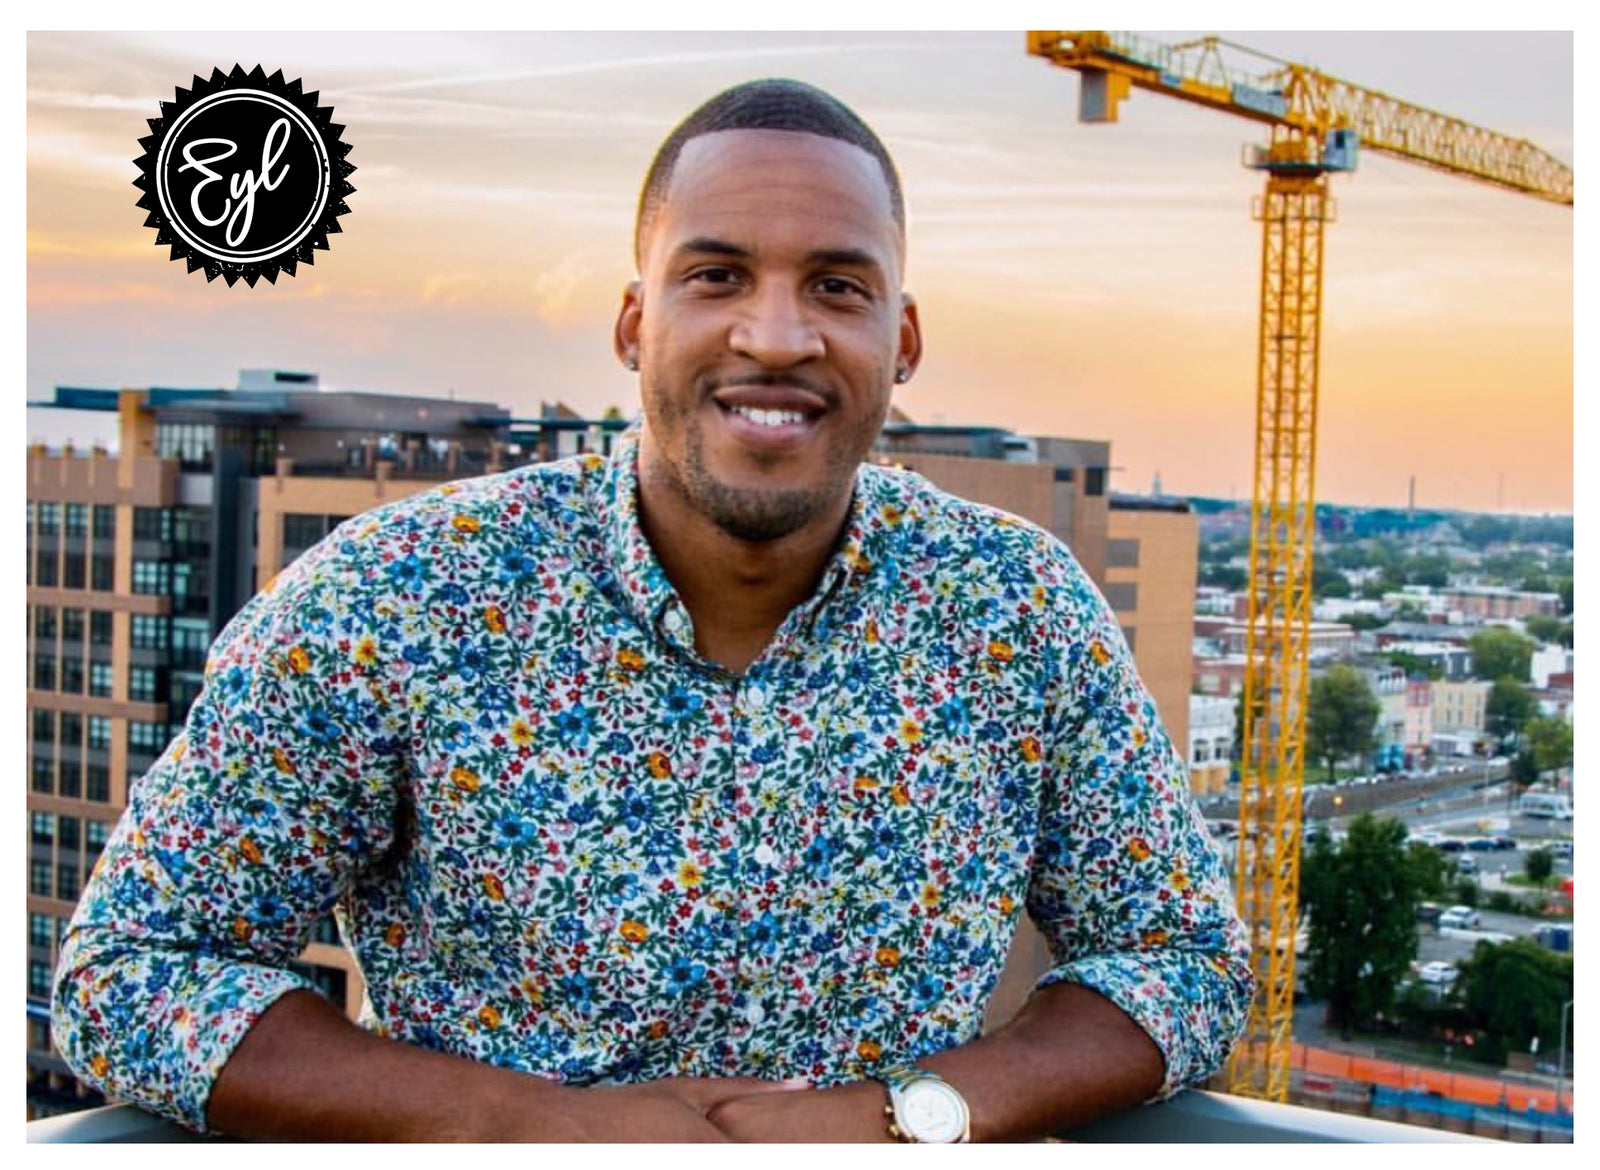 31 YEAR-OLD PRODIGY HAS DEVELOPED $50 MILLION IN AFFORDABLE HOUSING AND HE'S JUST GETTING STARTED.